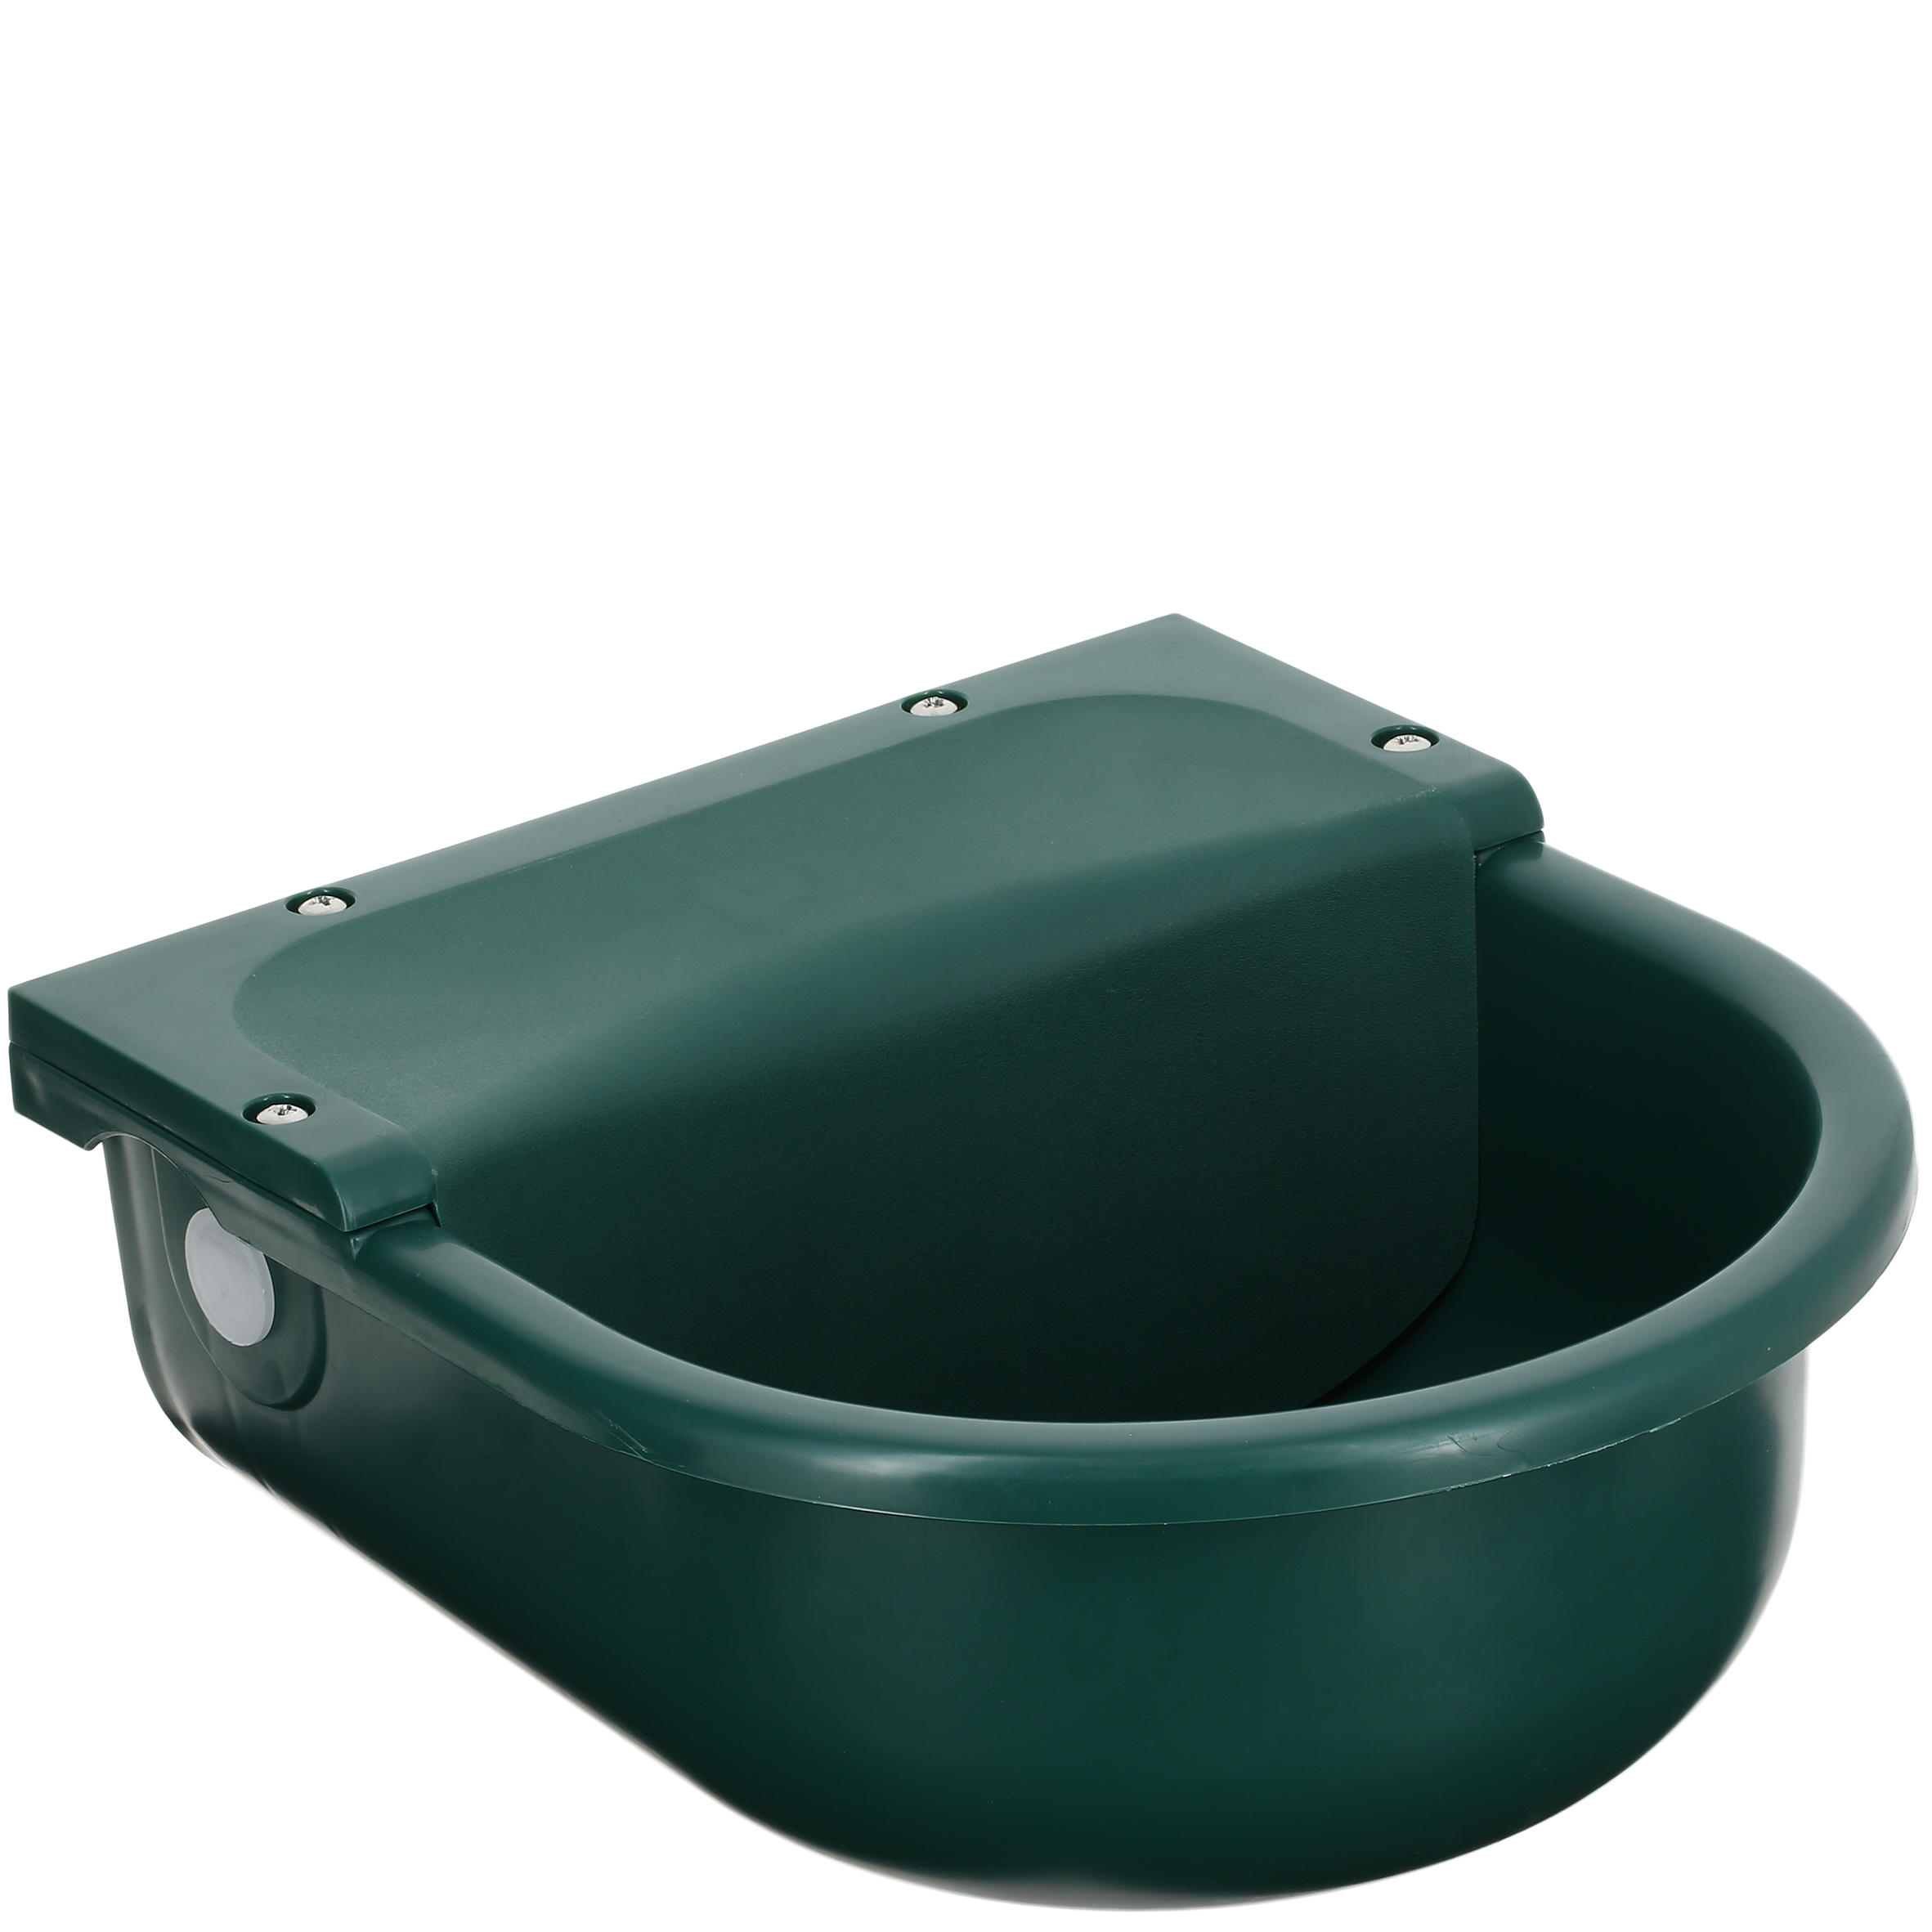 Automatic Horse Riding Drinking Trough - Green 1/8